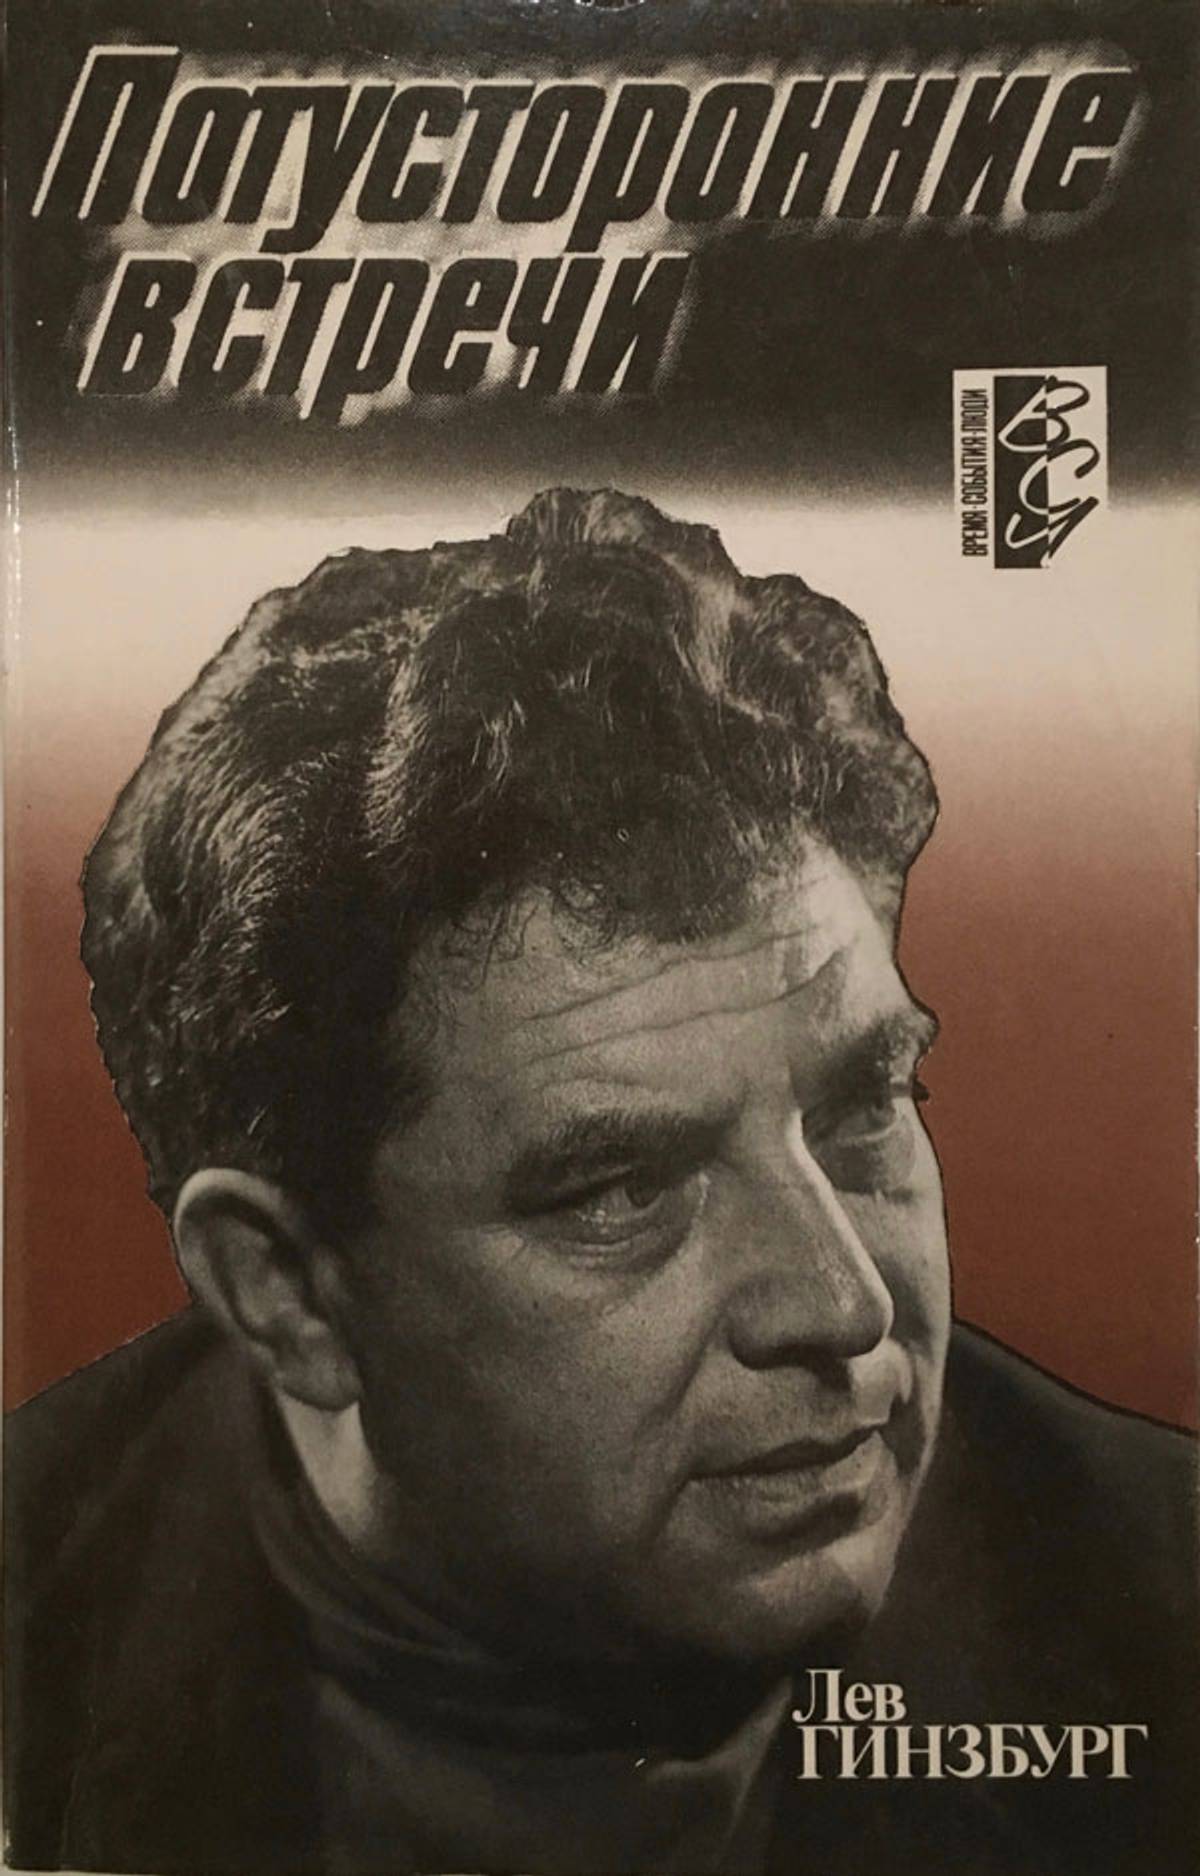 Cover of the 1990 book edition of Ginzburg’s ‘Otherworldly Encounters’